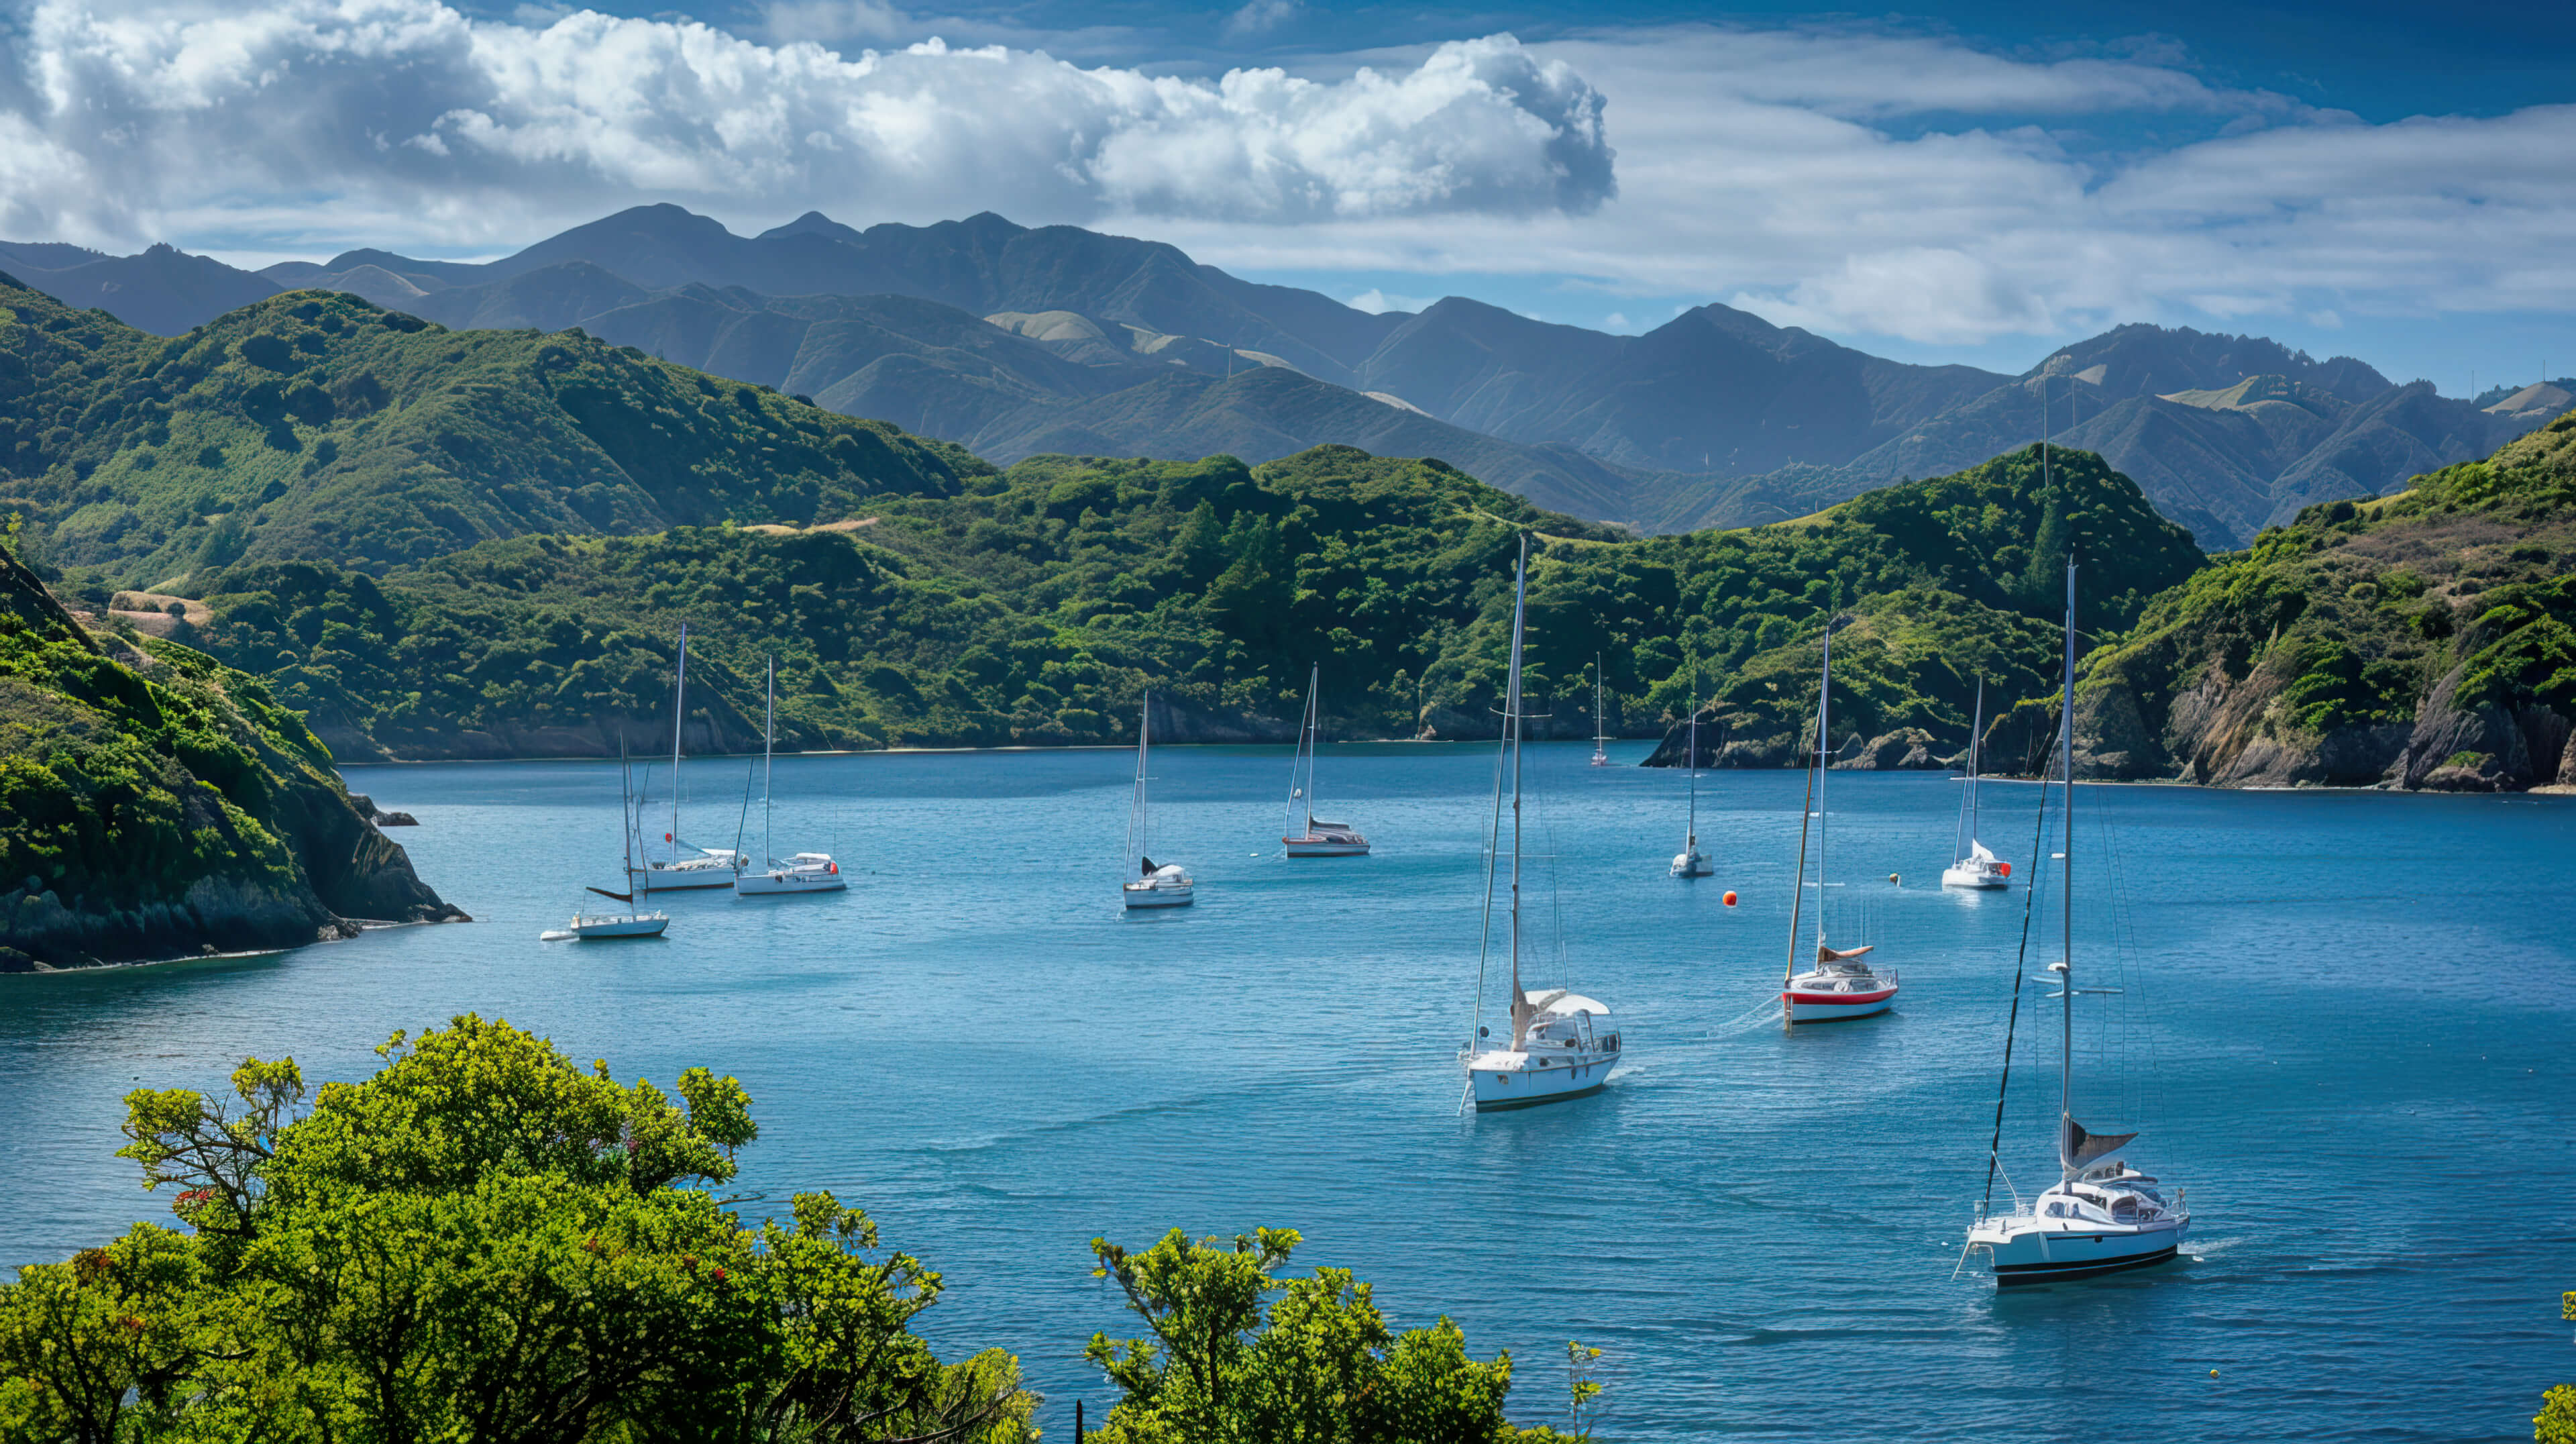 In the wallpaper sailboats are peacefully anchored in a serene bay with their masts soaring high against a backdrop of vibrant green hills and crystal clear blue waters